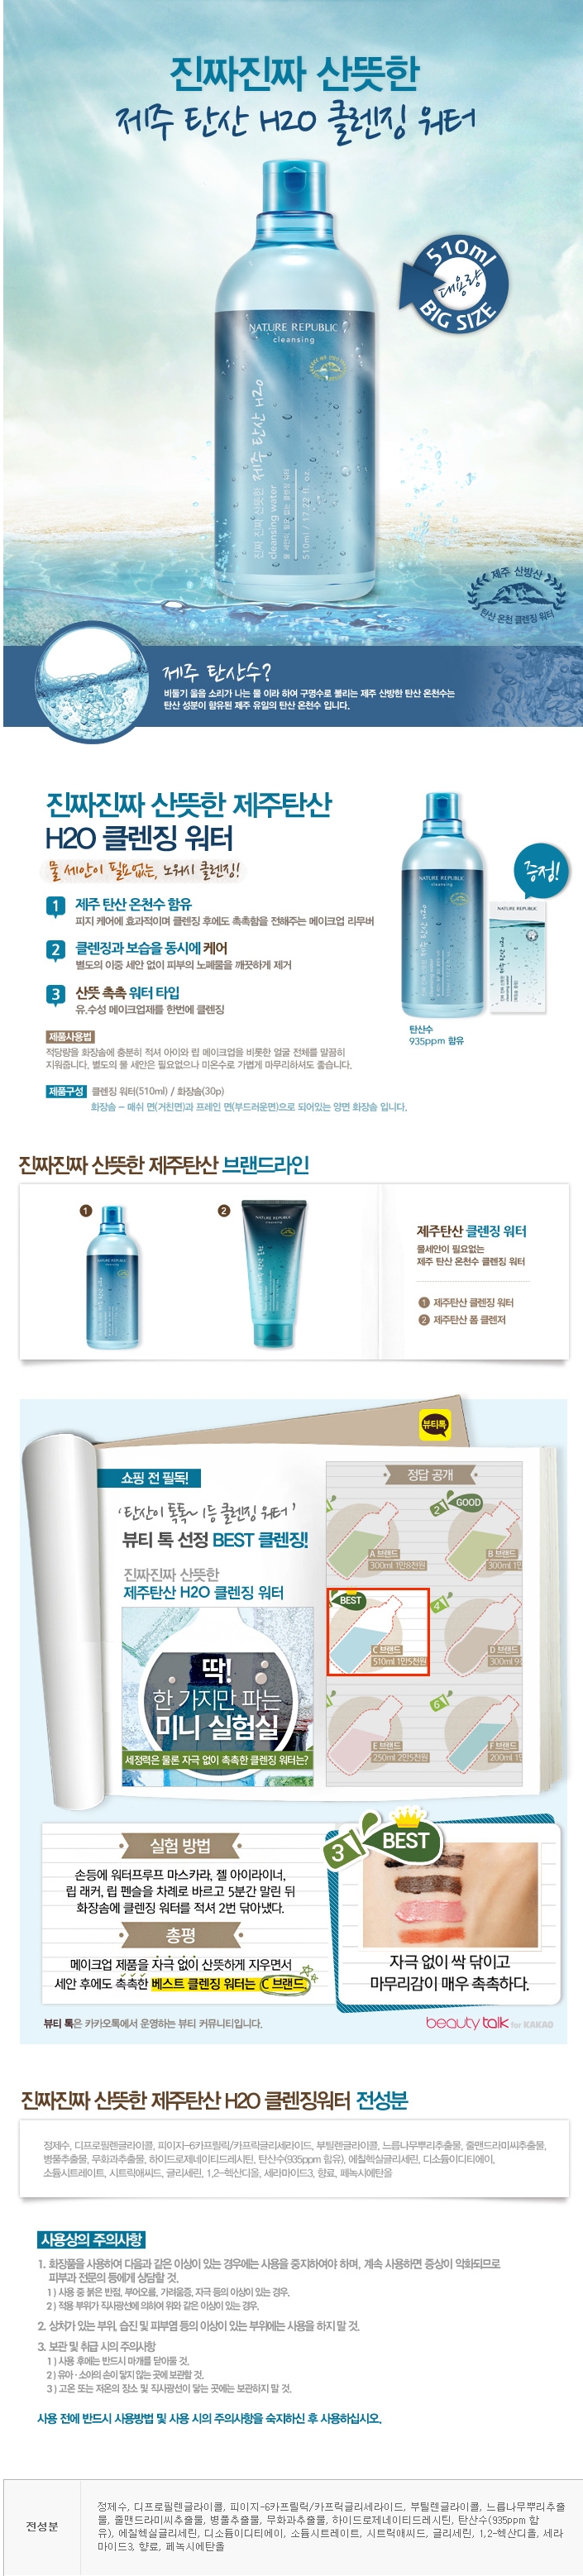 ULTRA FRESH JEJU CARBONIC H2O CLEANSING WATER